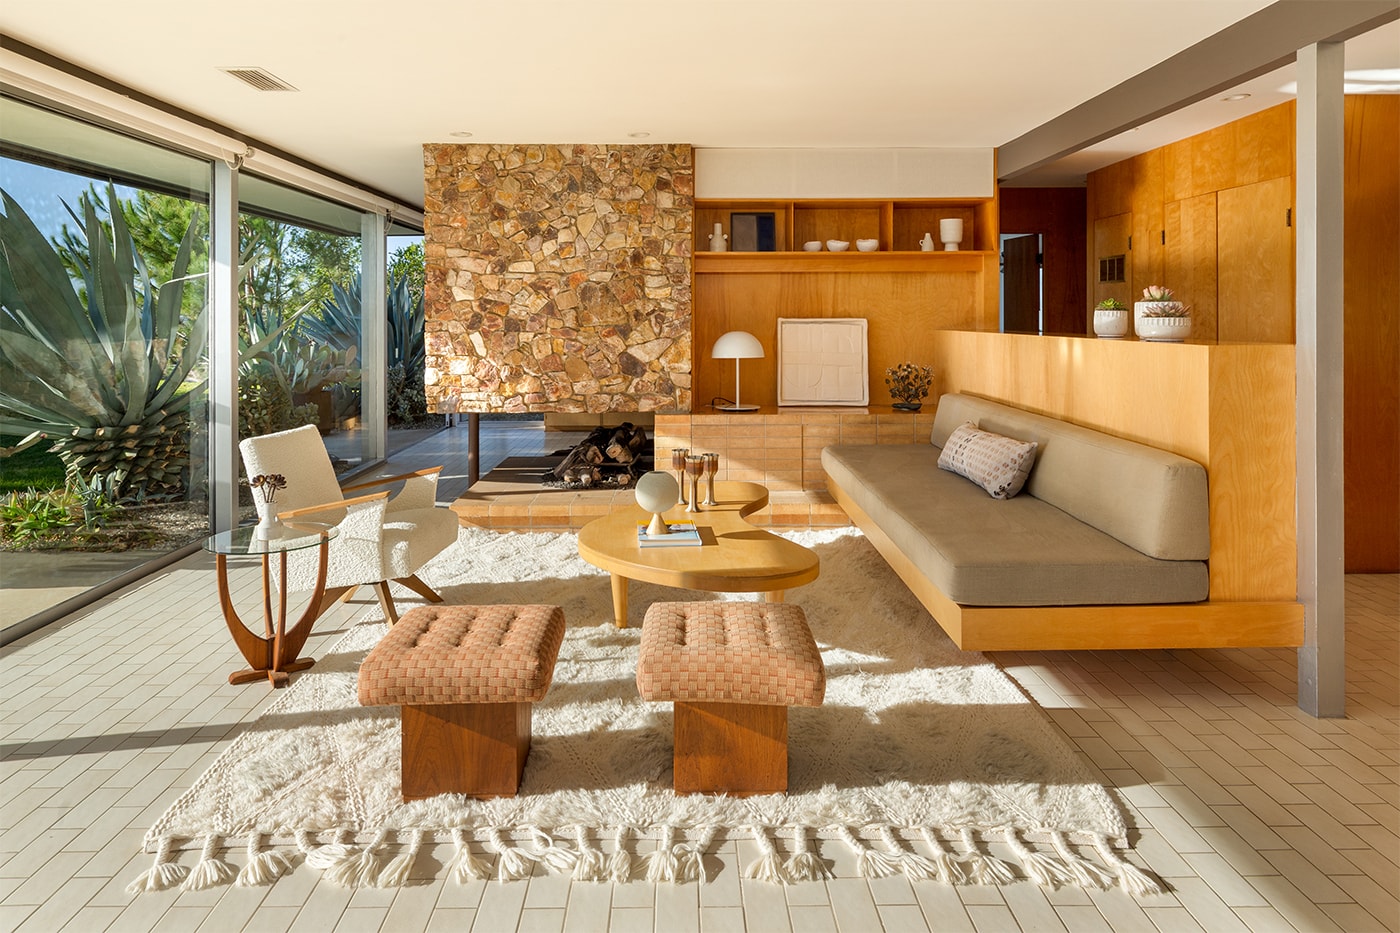 Take a Look Inside Some of the World's Most Impressive Modernist Homes